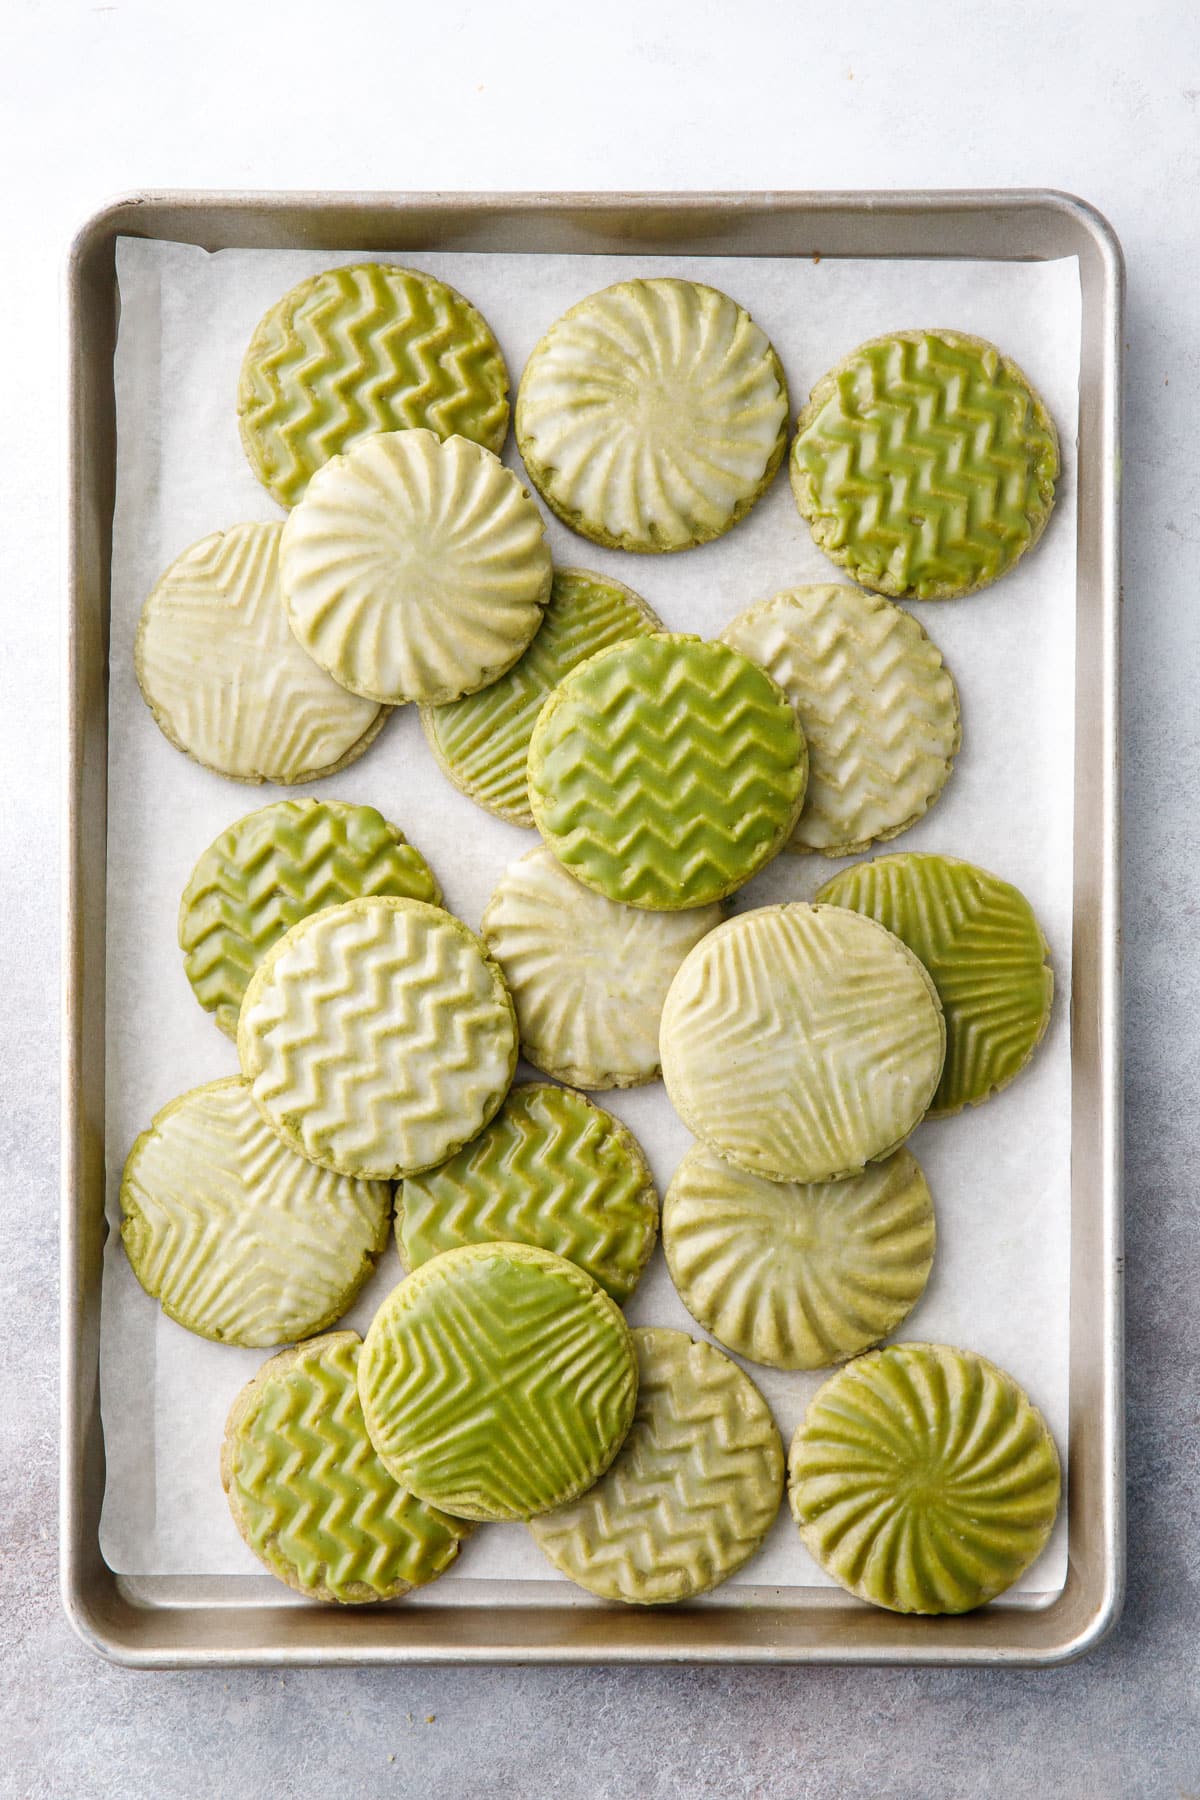 Overhead, messy arrangement of Glazed Matcha Sugar Cookies on a parchment lined baking sheet; cookies have white or green glaze and geometric stamped designs.